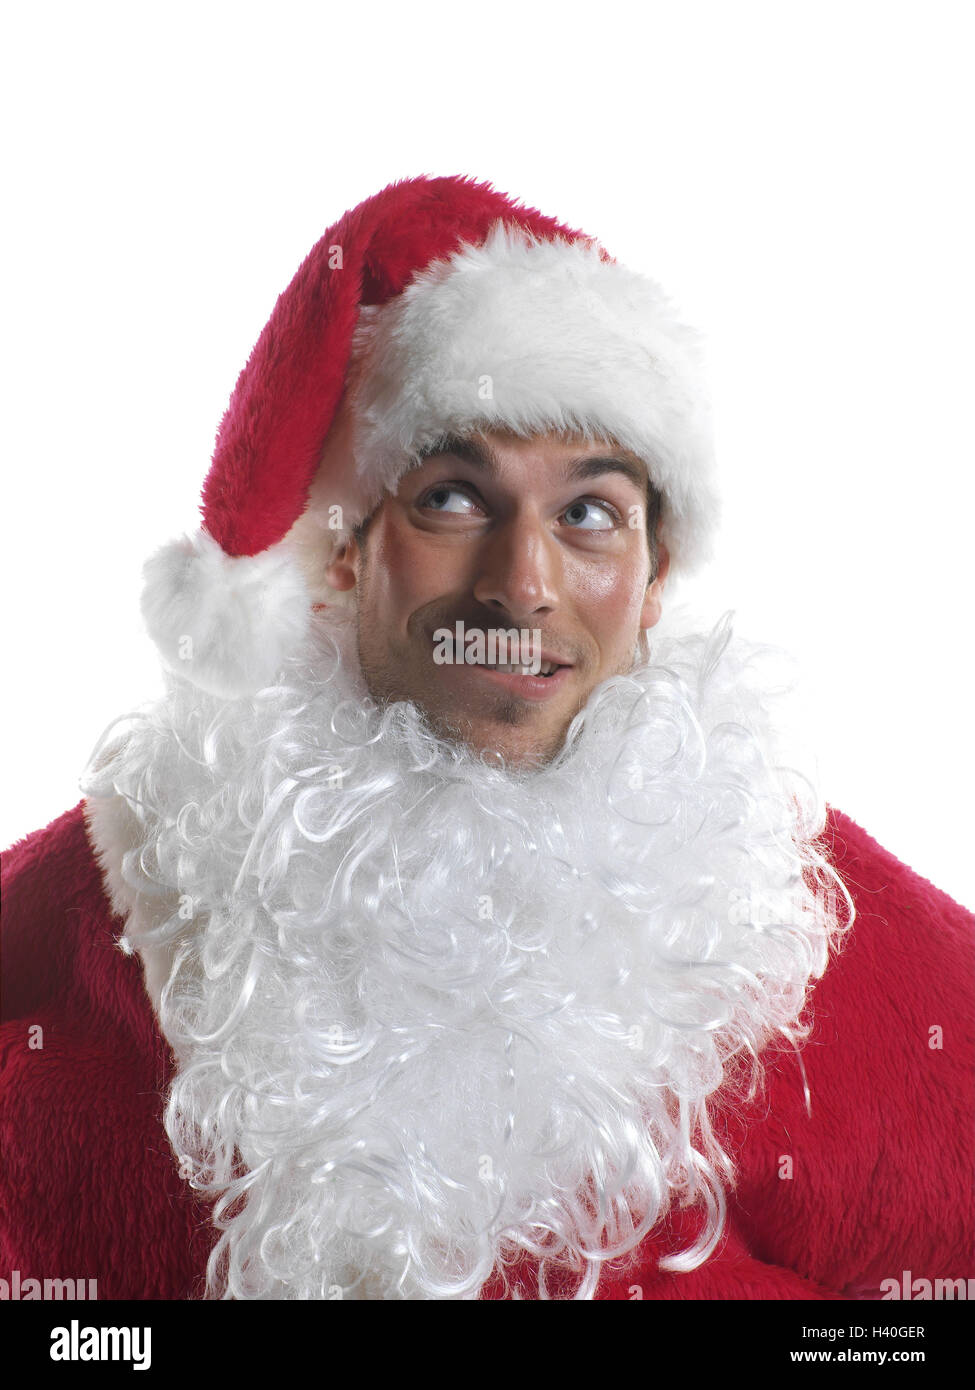 Christmas, man, Santa's costume, to high-level views, portrait, Christmas, yule tide, x-mas, young, Santa, Santa Claus, Santa Claus, headgear, cap, Santa's hat, pointed cap, red, lining, costume, masks, dresses up, for Christmas, beard, drunkenness beard, Stock Photo